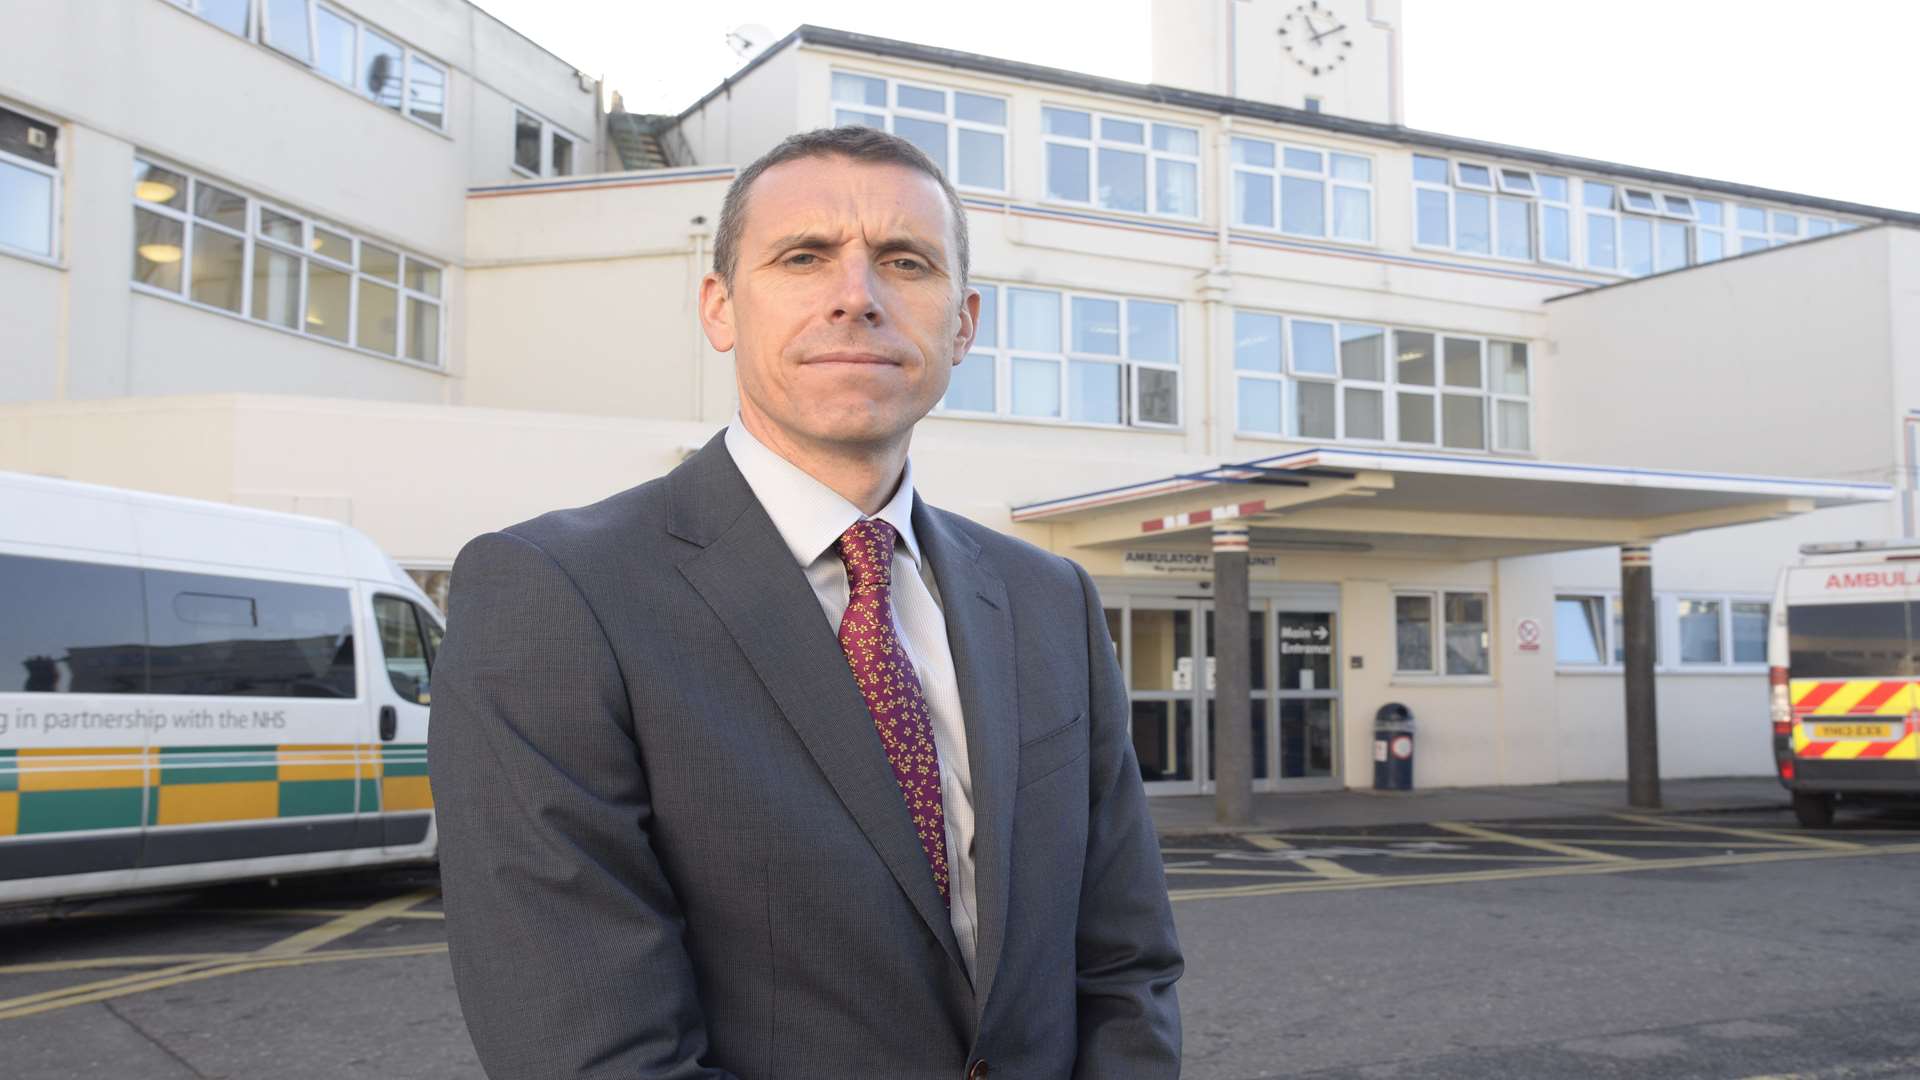 Matthew Kershaw, the chief executive of the east Kent hospitals trust